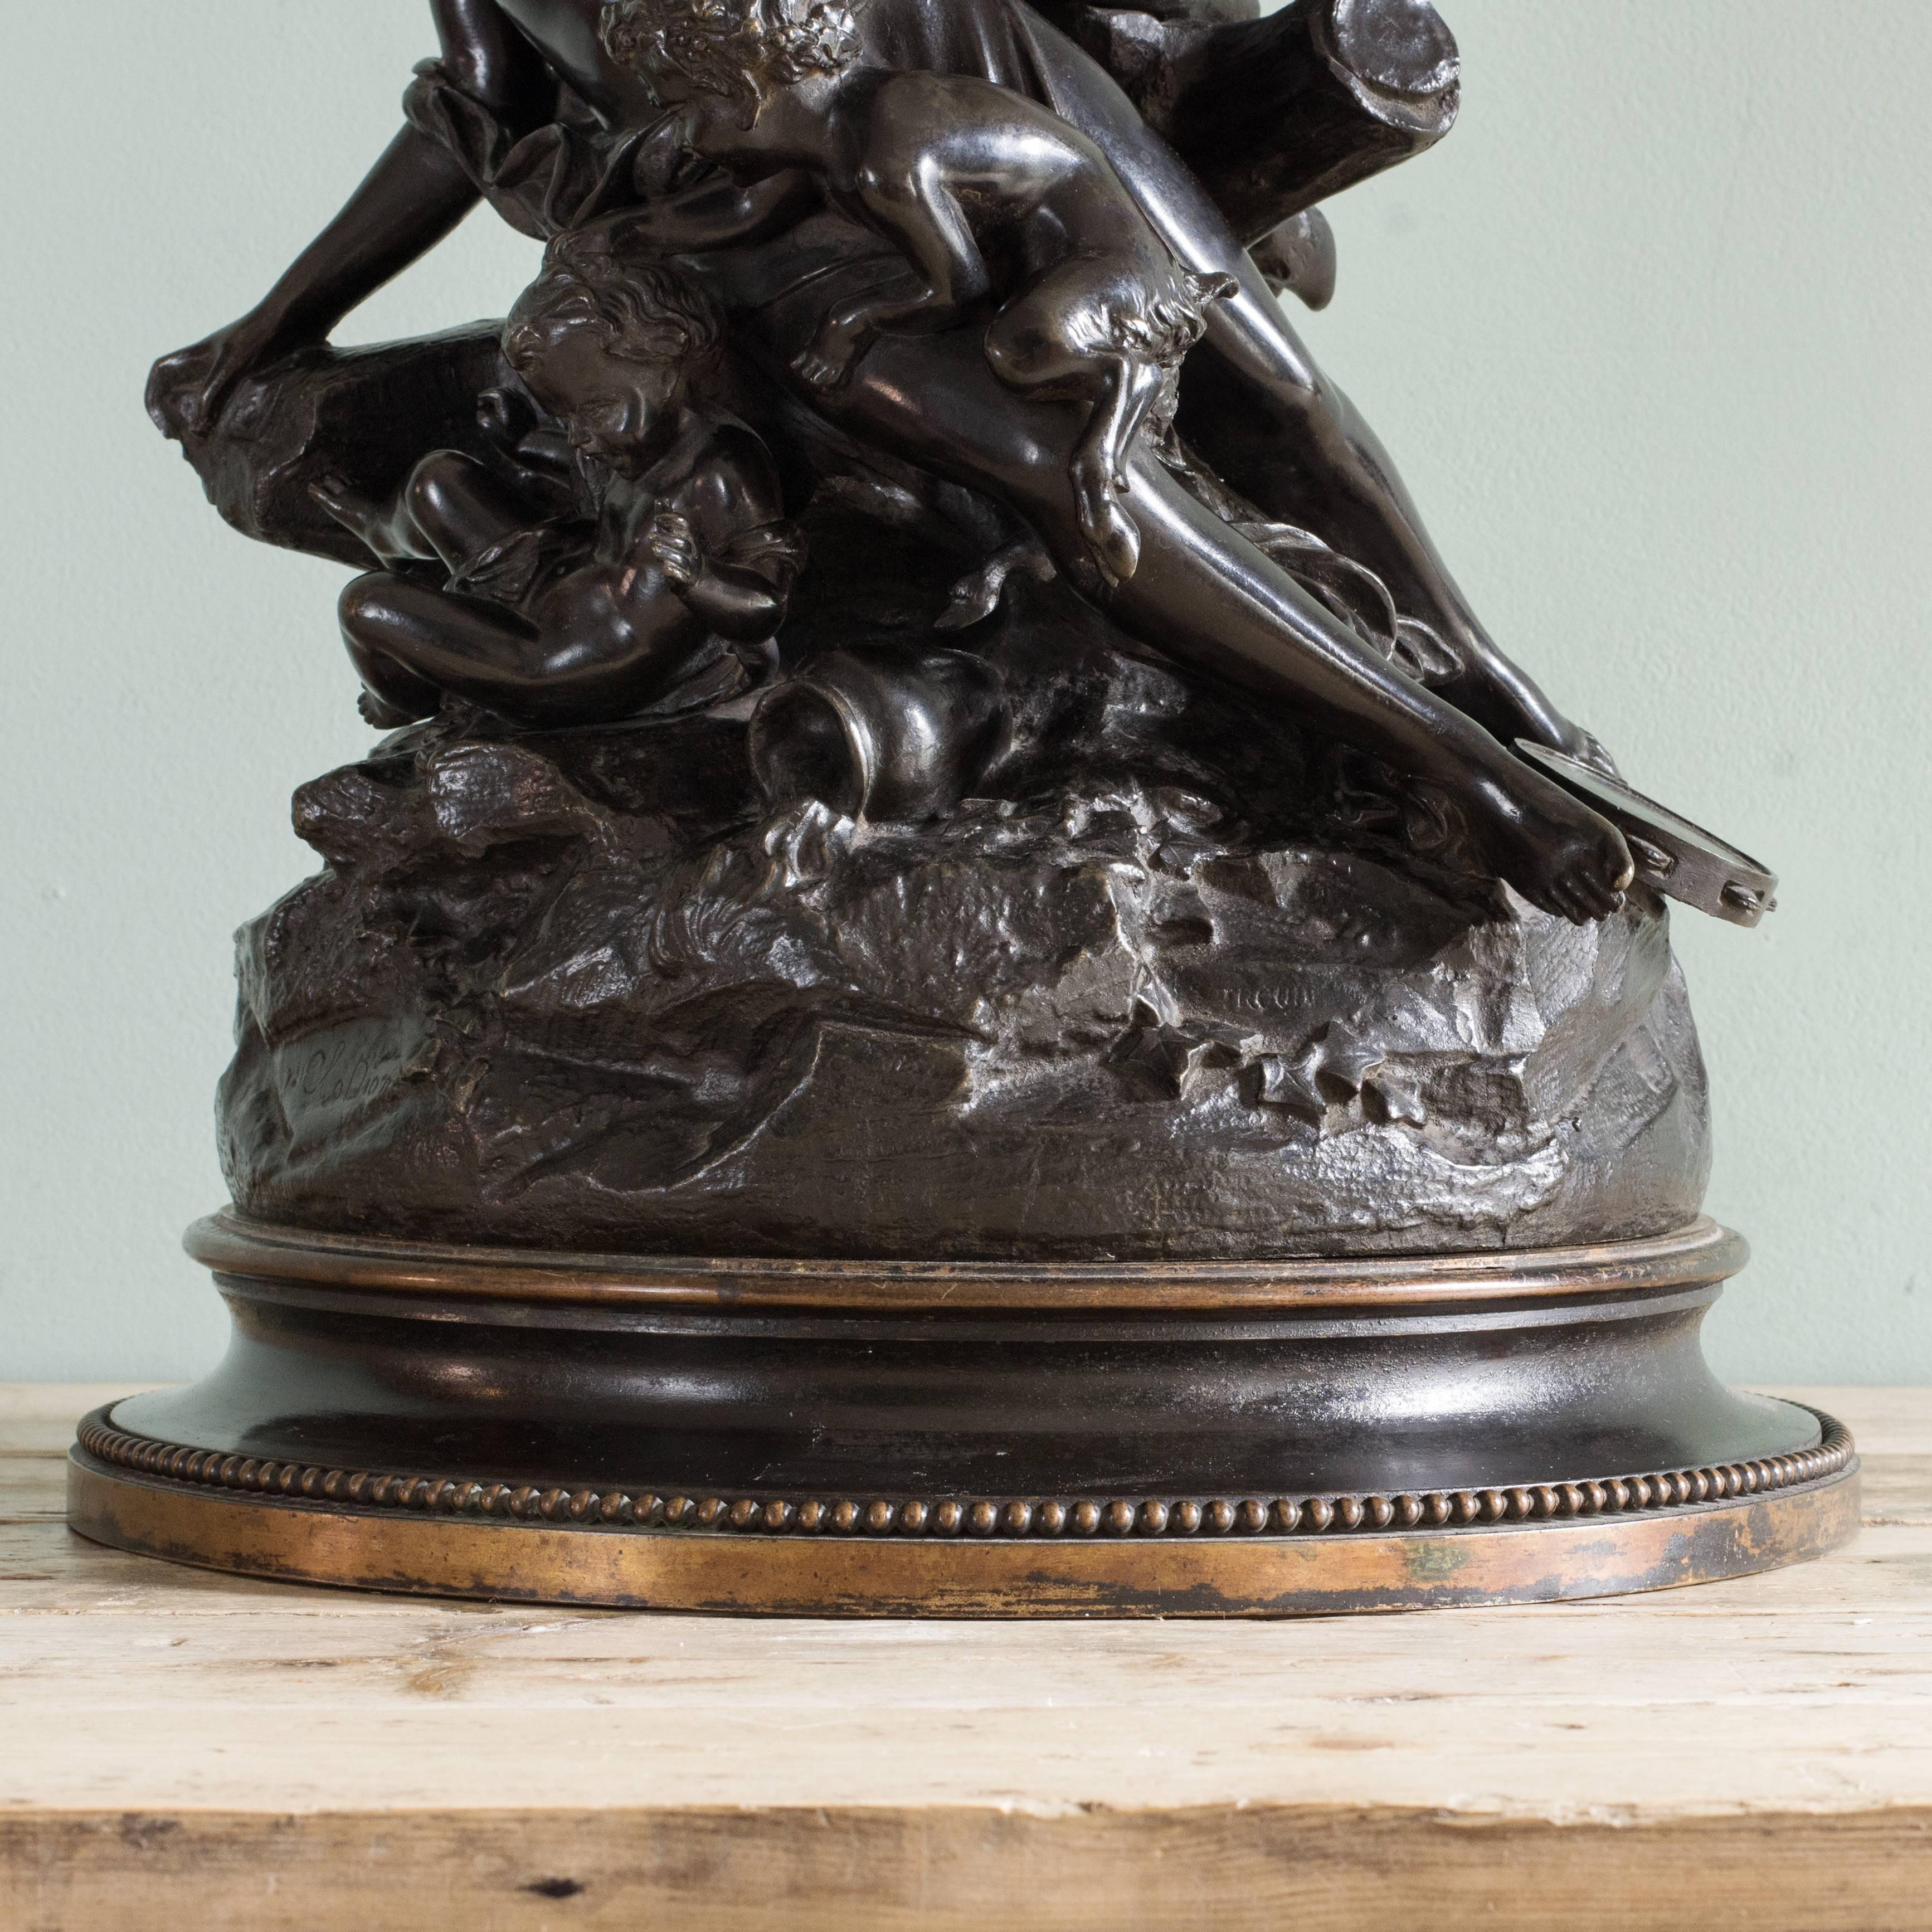 19th Century Bronze Sculpture of a Nymph, Satyr and Putti after Clodion